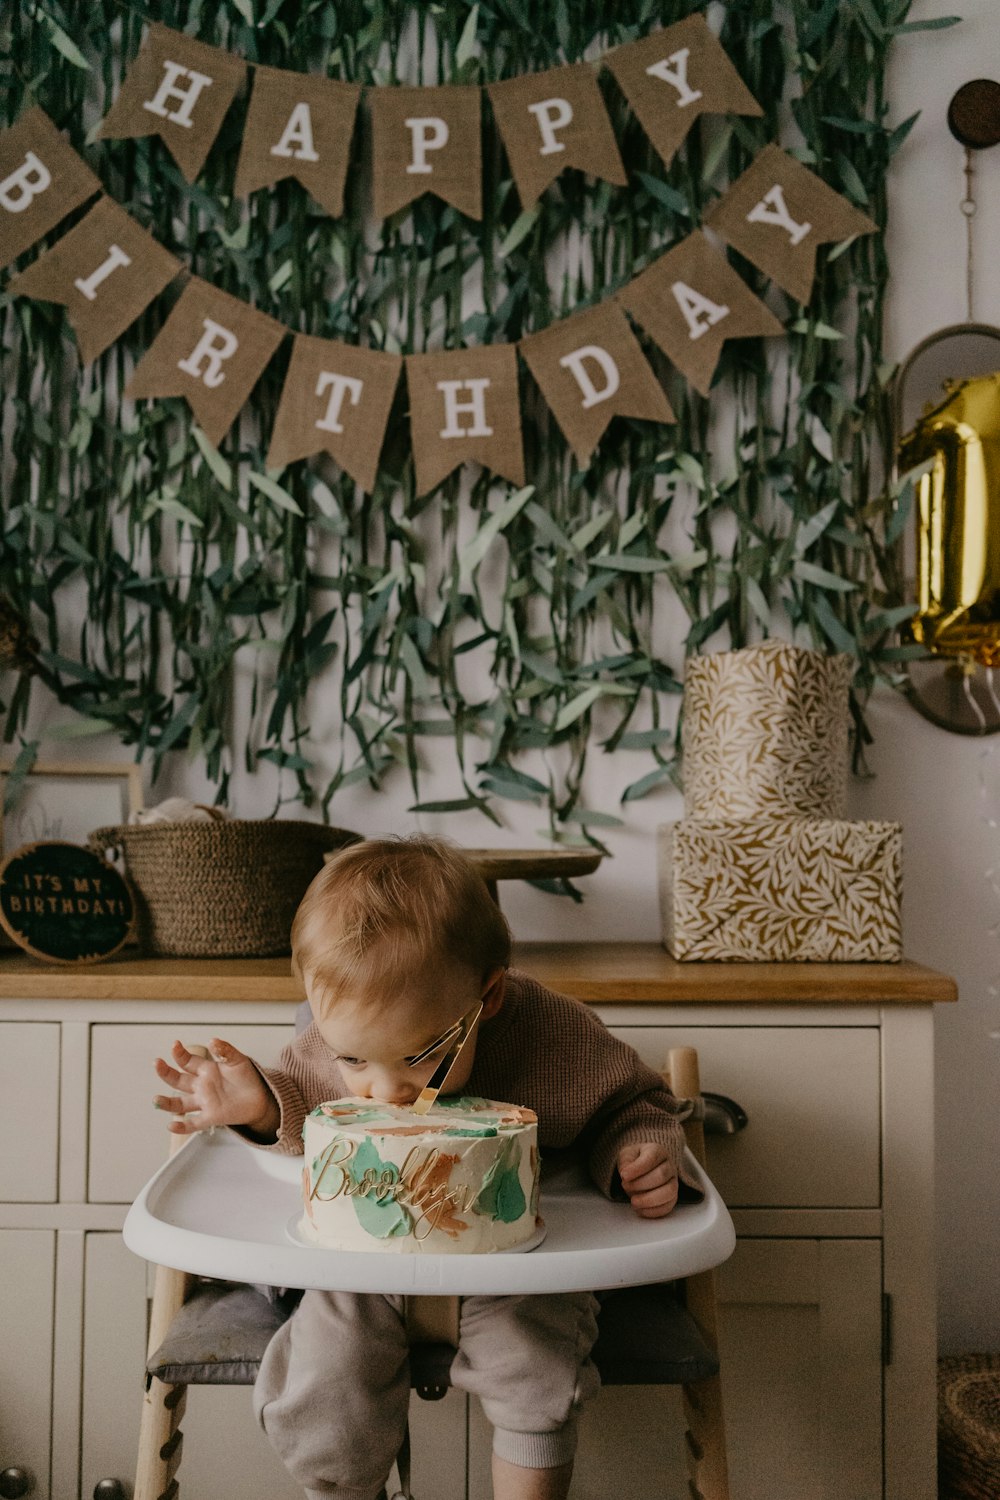 a baby sitting in a high chair with a birthday cake